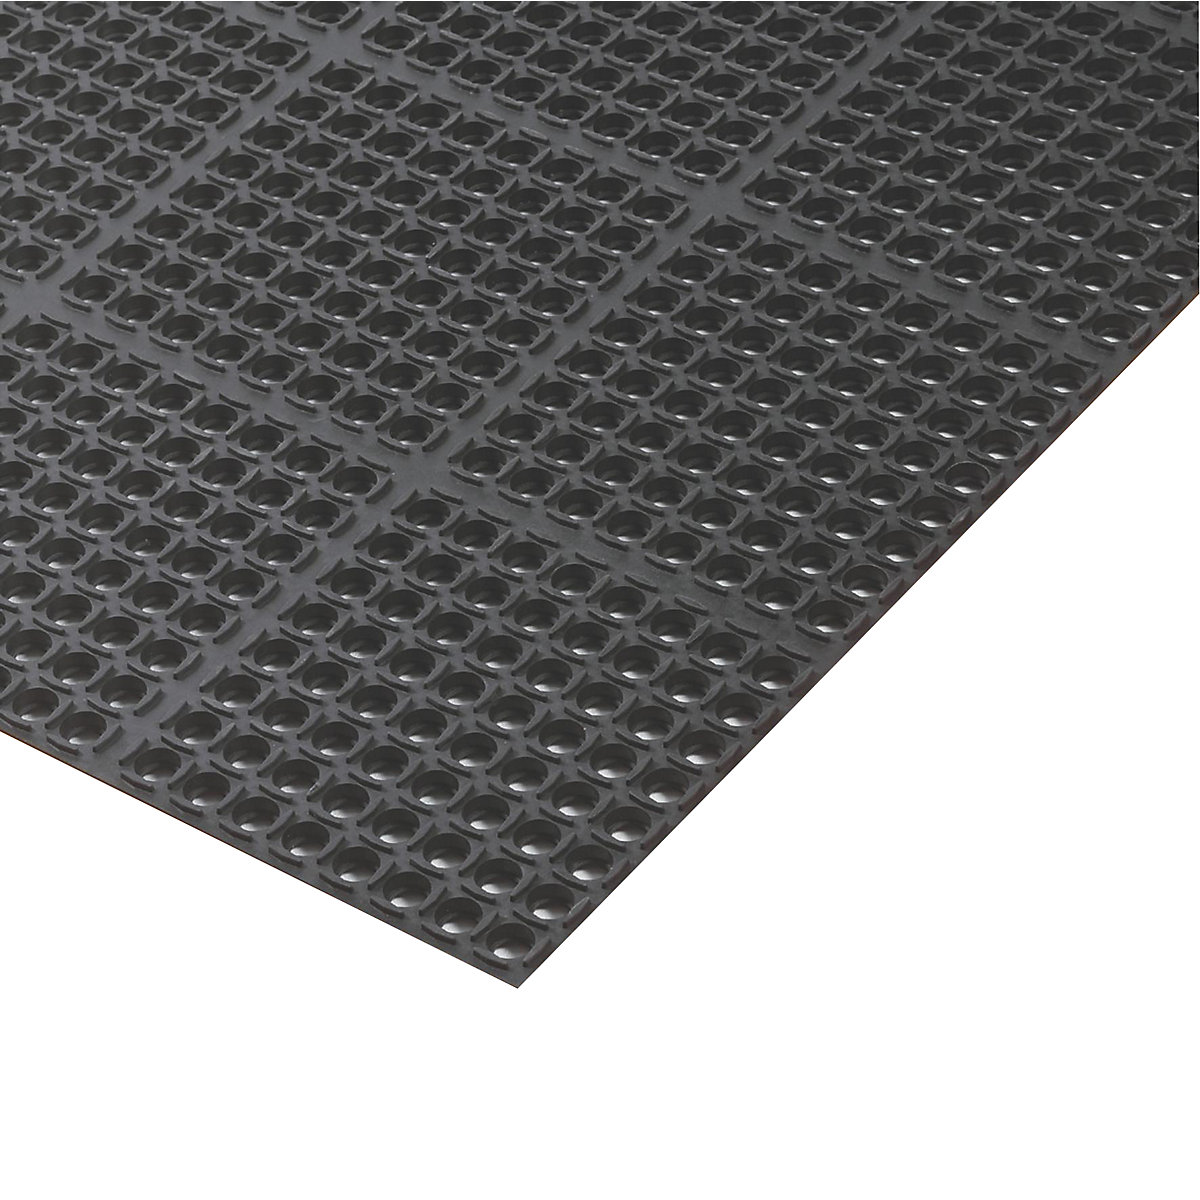 Safety Stance anti-fatigue matting – NOTRAX, perforated, LxW 1630 x 970 mm-5